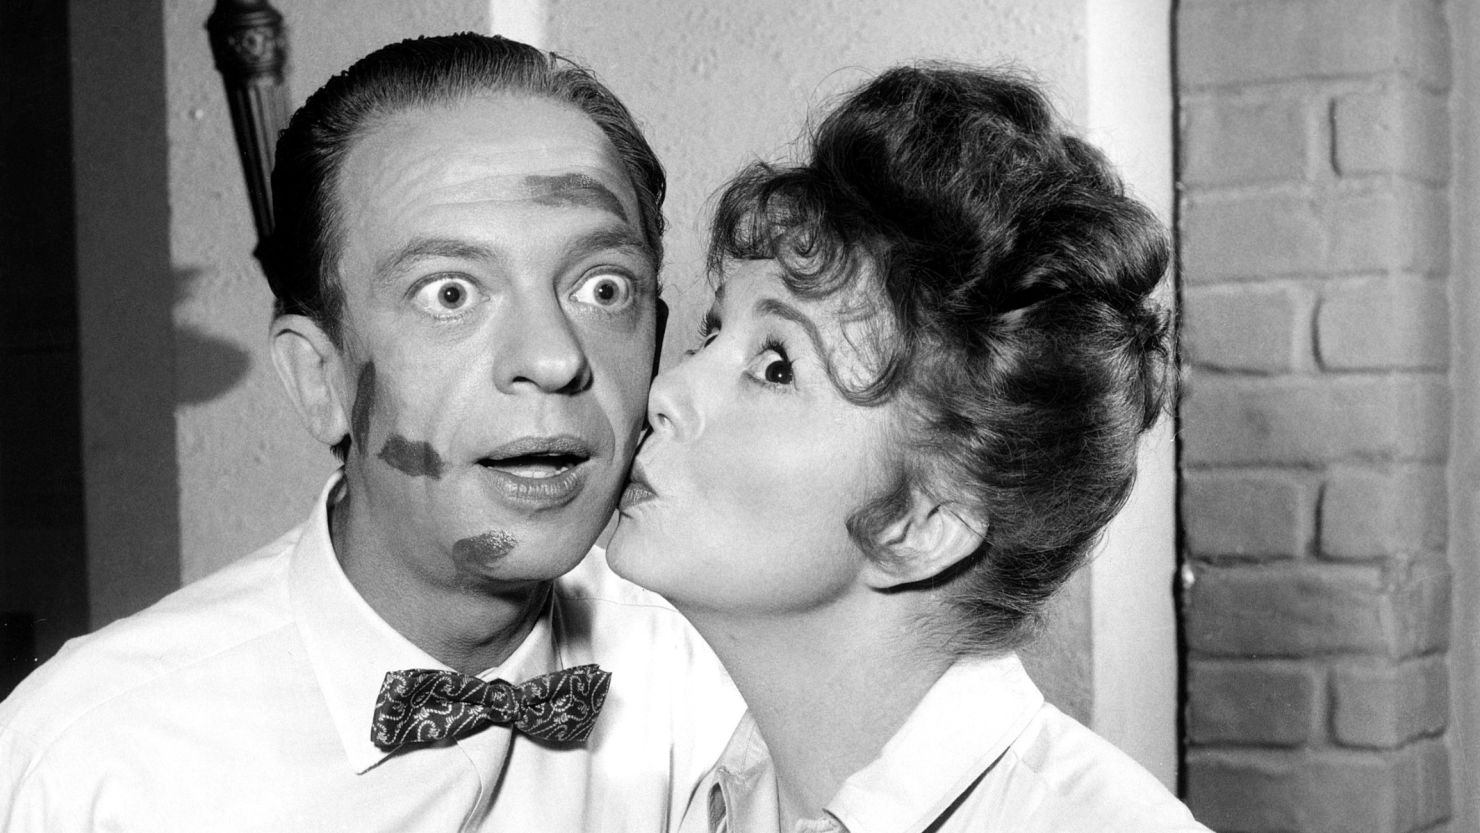 Don Knotts with Betty Lynn on "The Andy Griffith Show" 1960-68